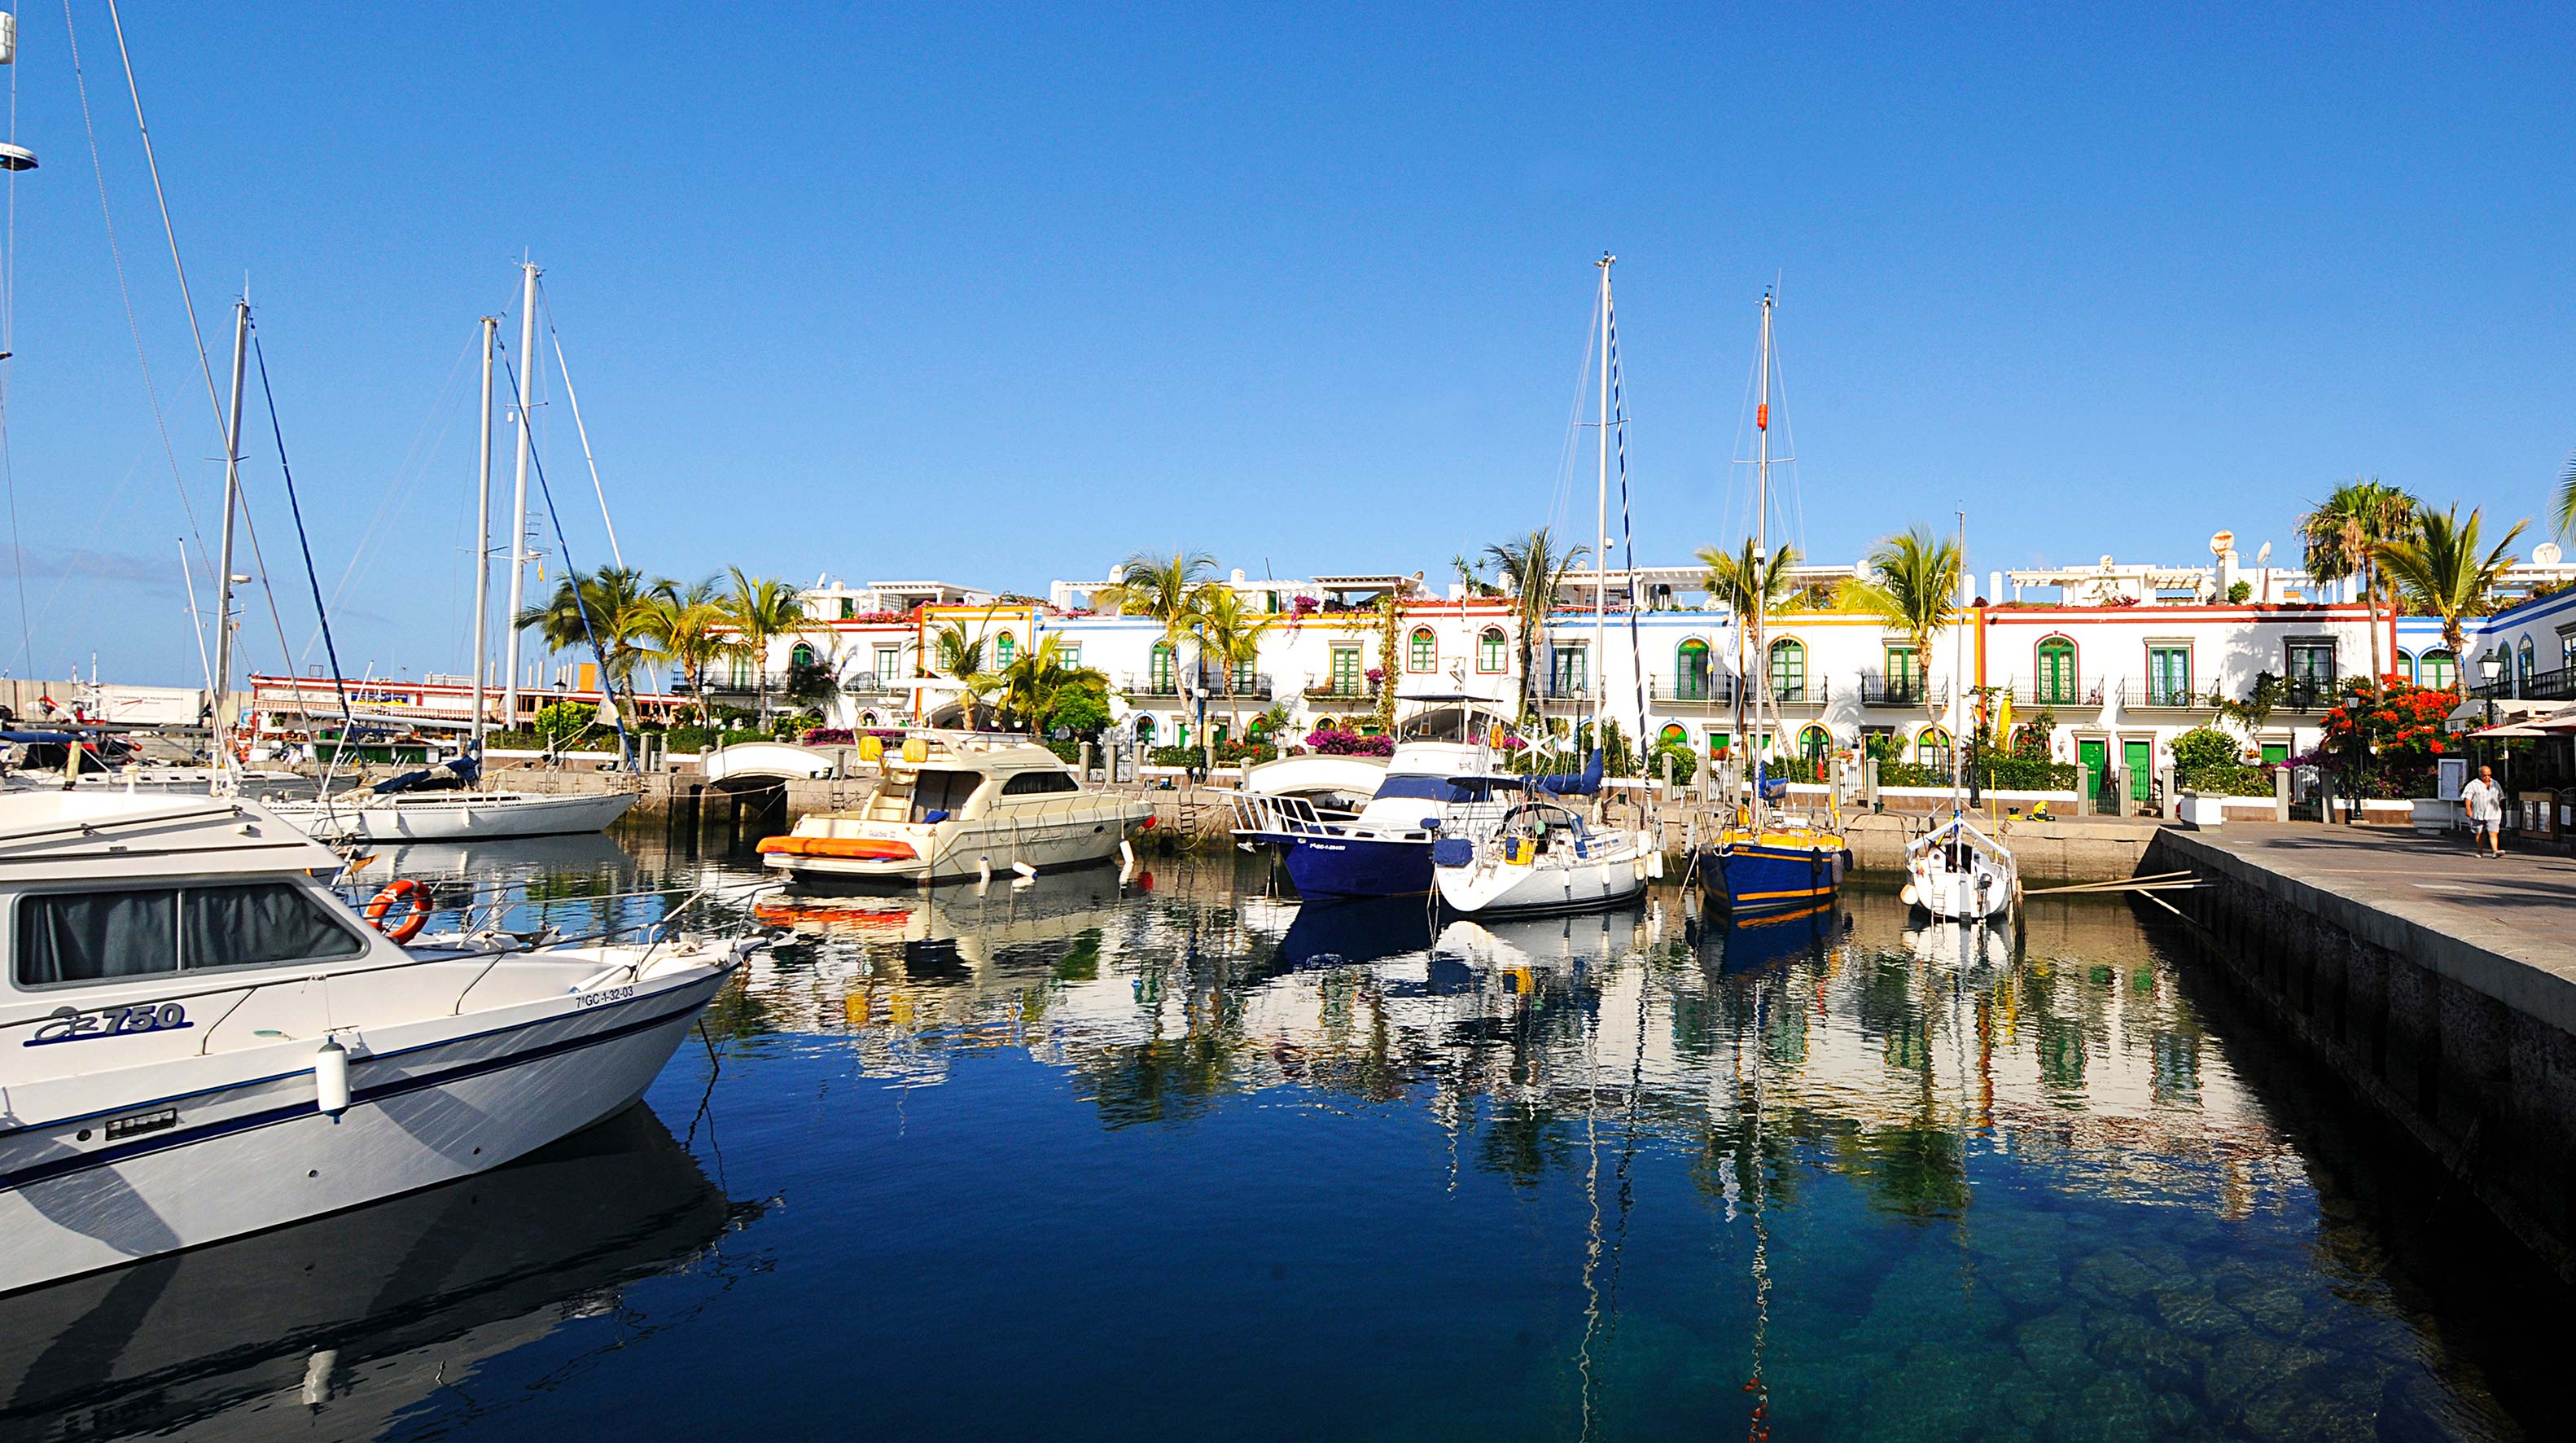 The Venice of the Canary Islands